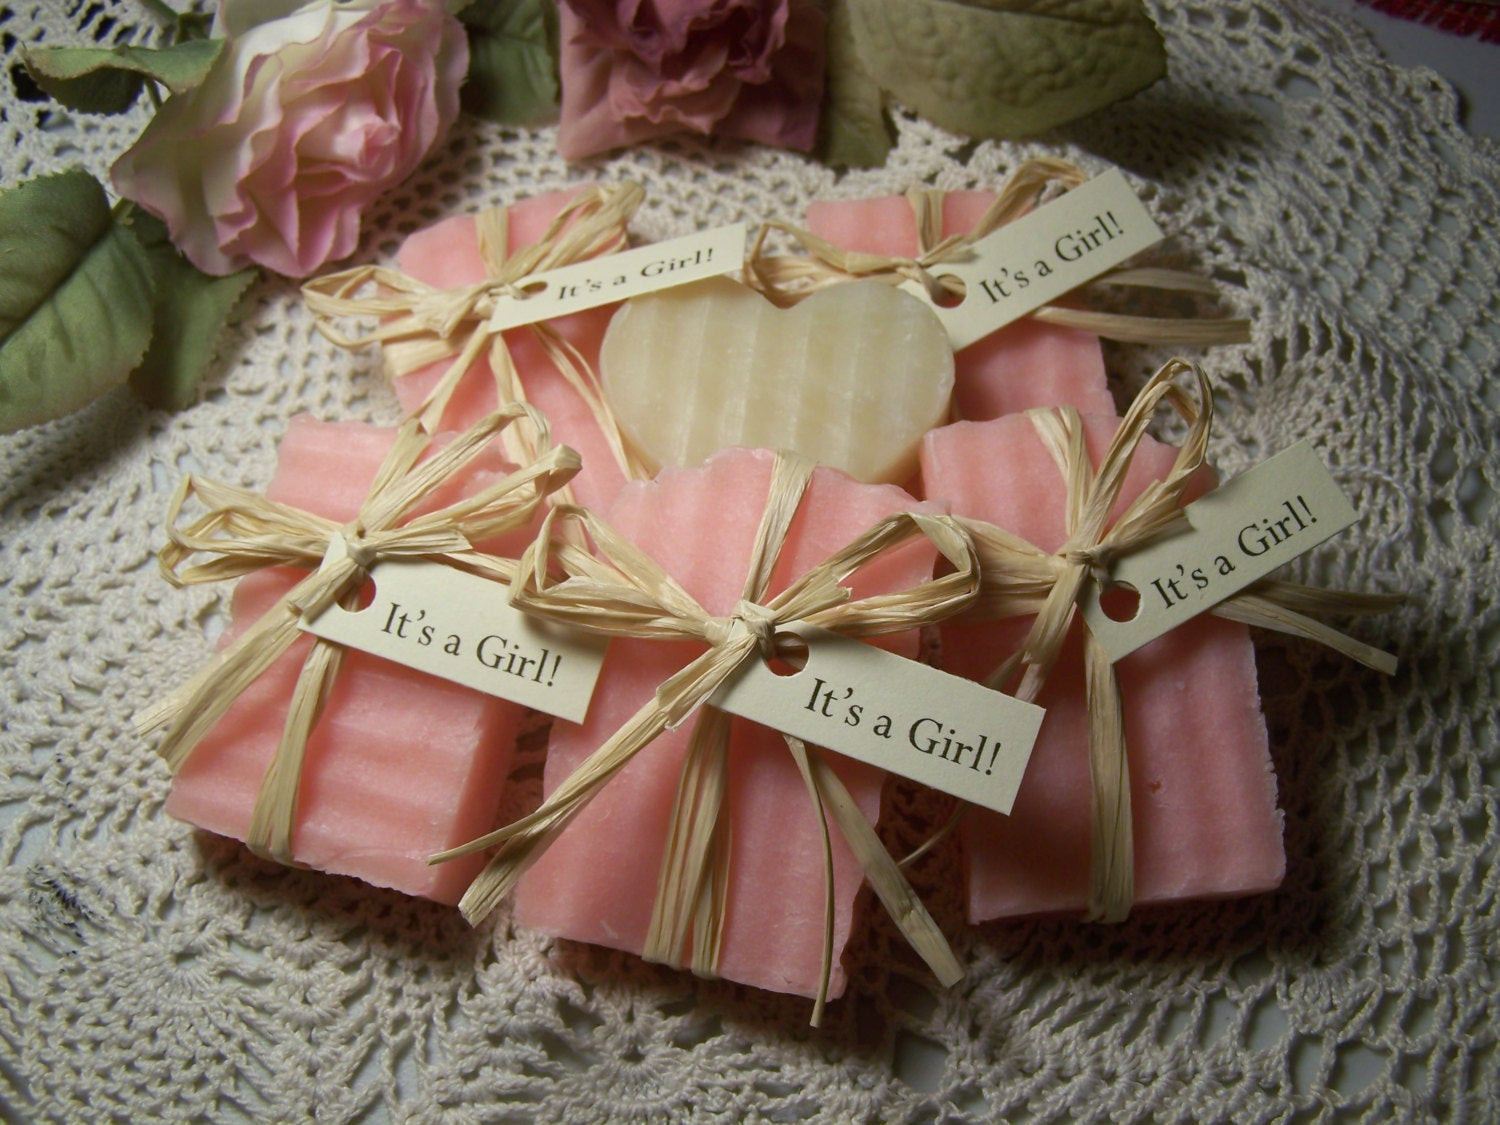 Party Favors For Baby Shower
 It s a Girl Baby shower favors mini soaps 30 soaps